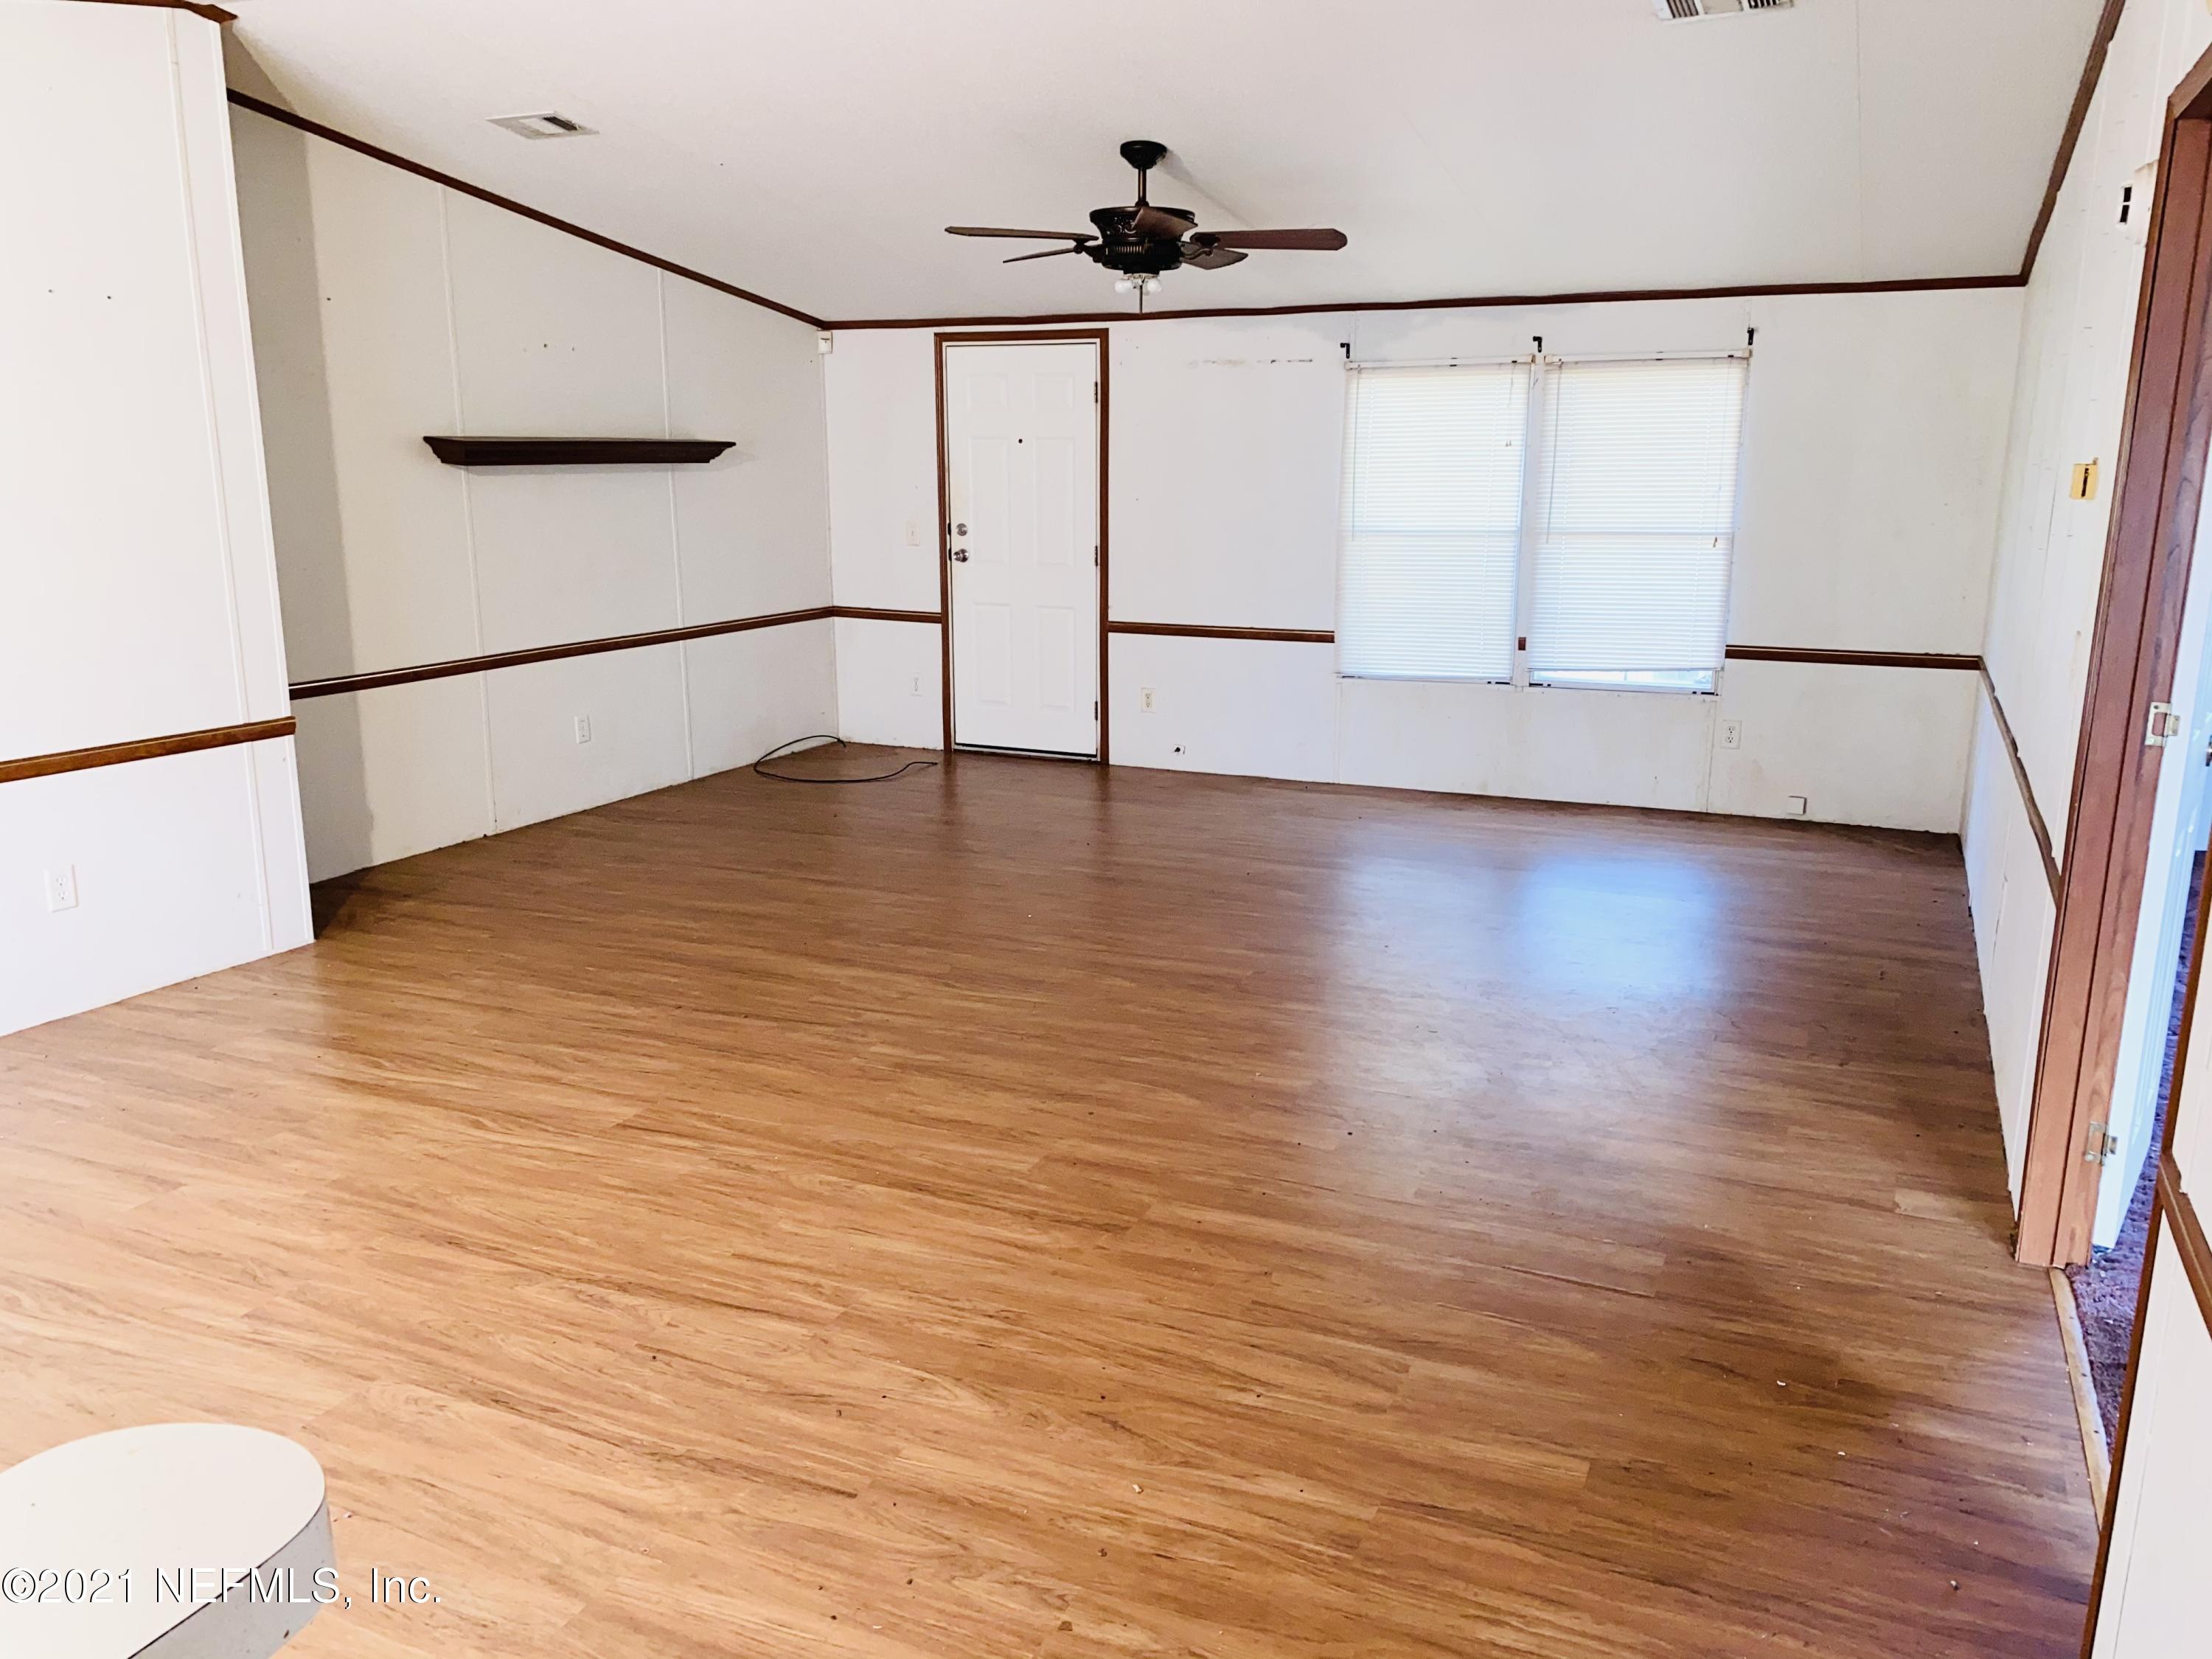 a view of an empty room with wooden floor and a window